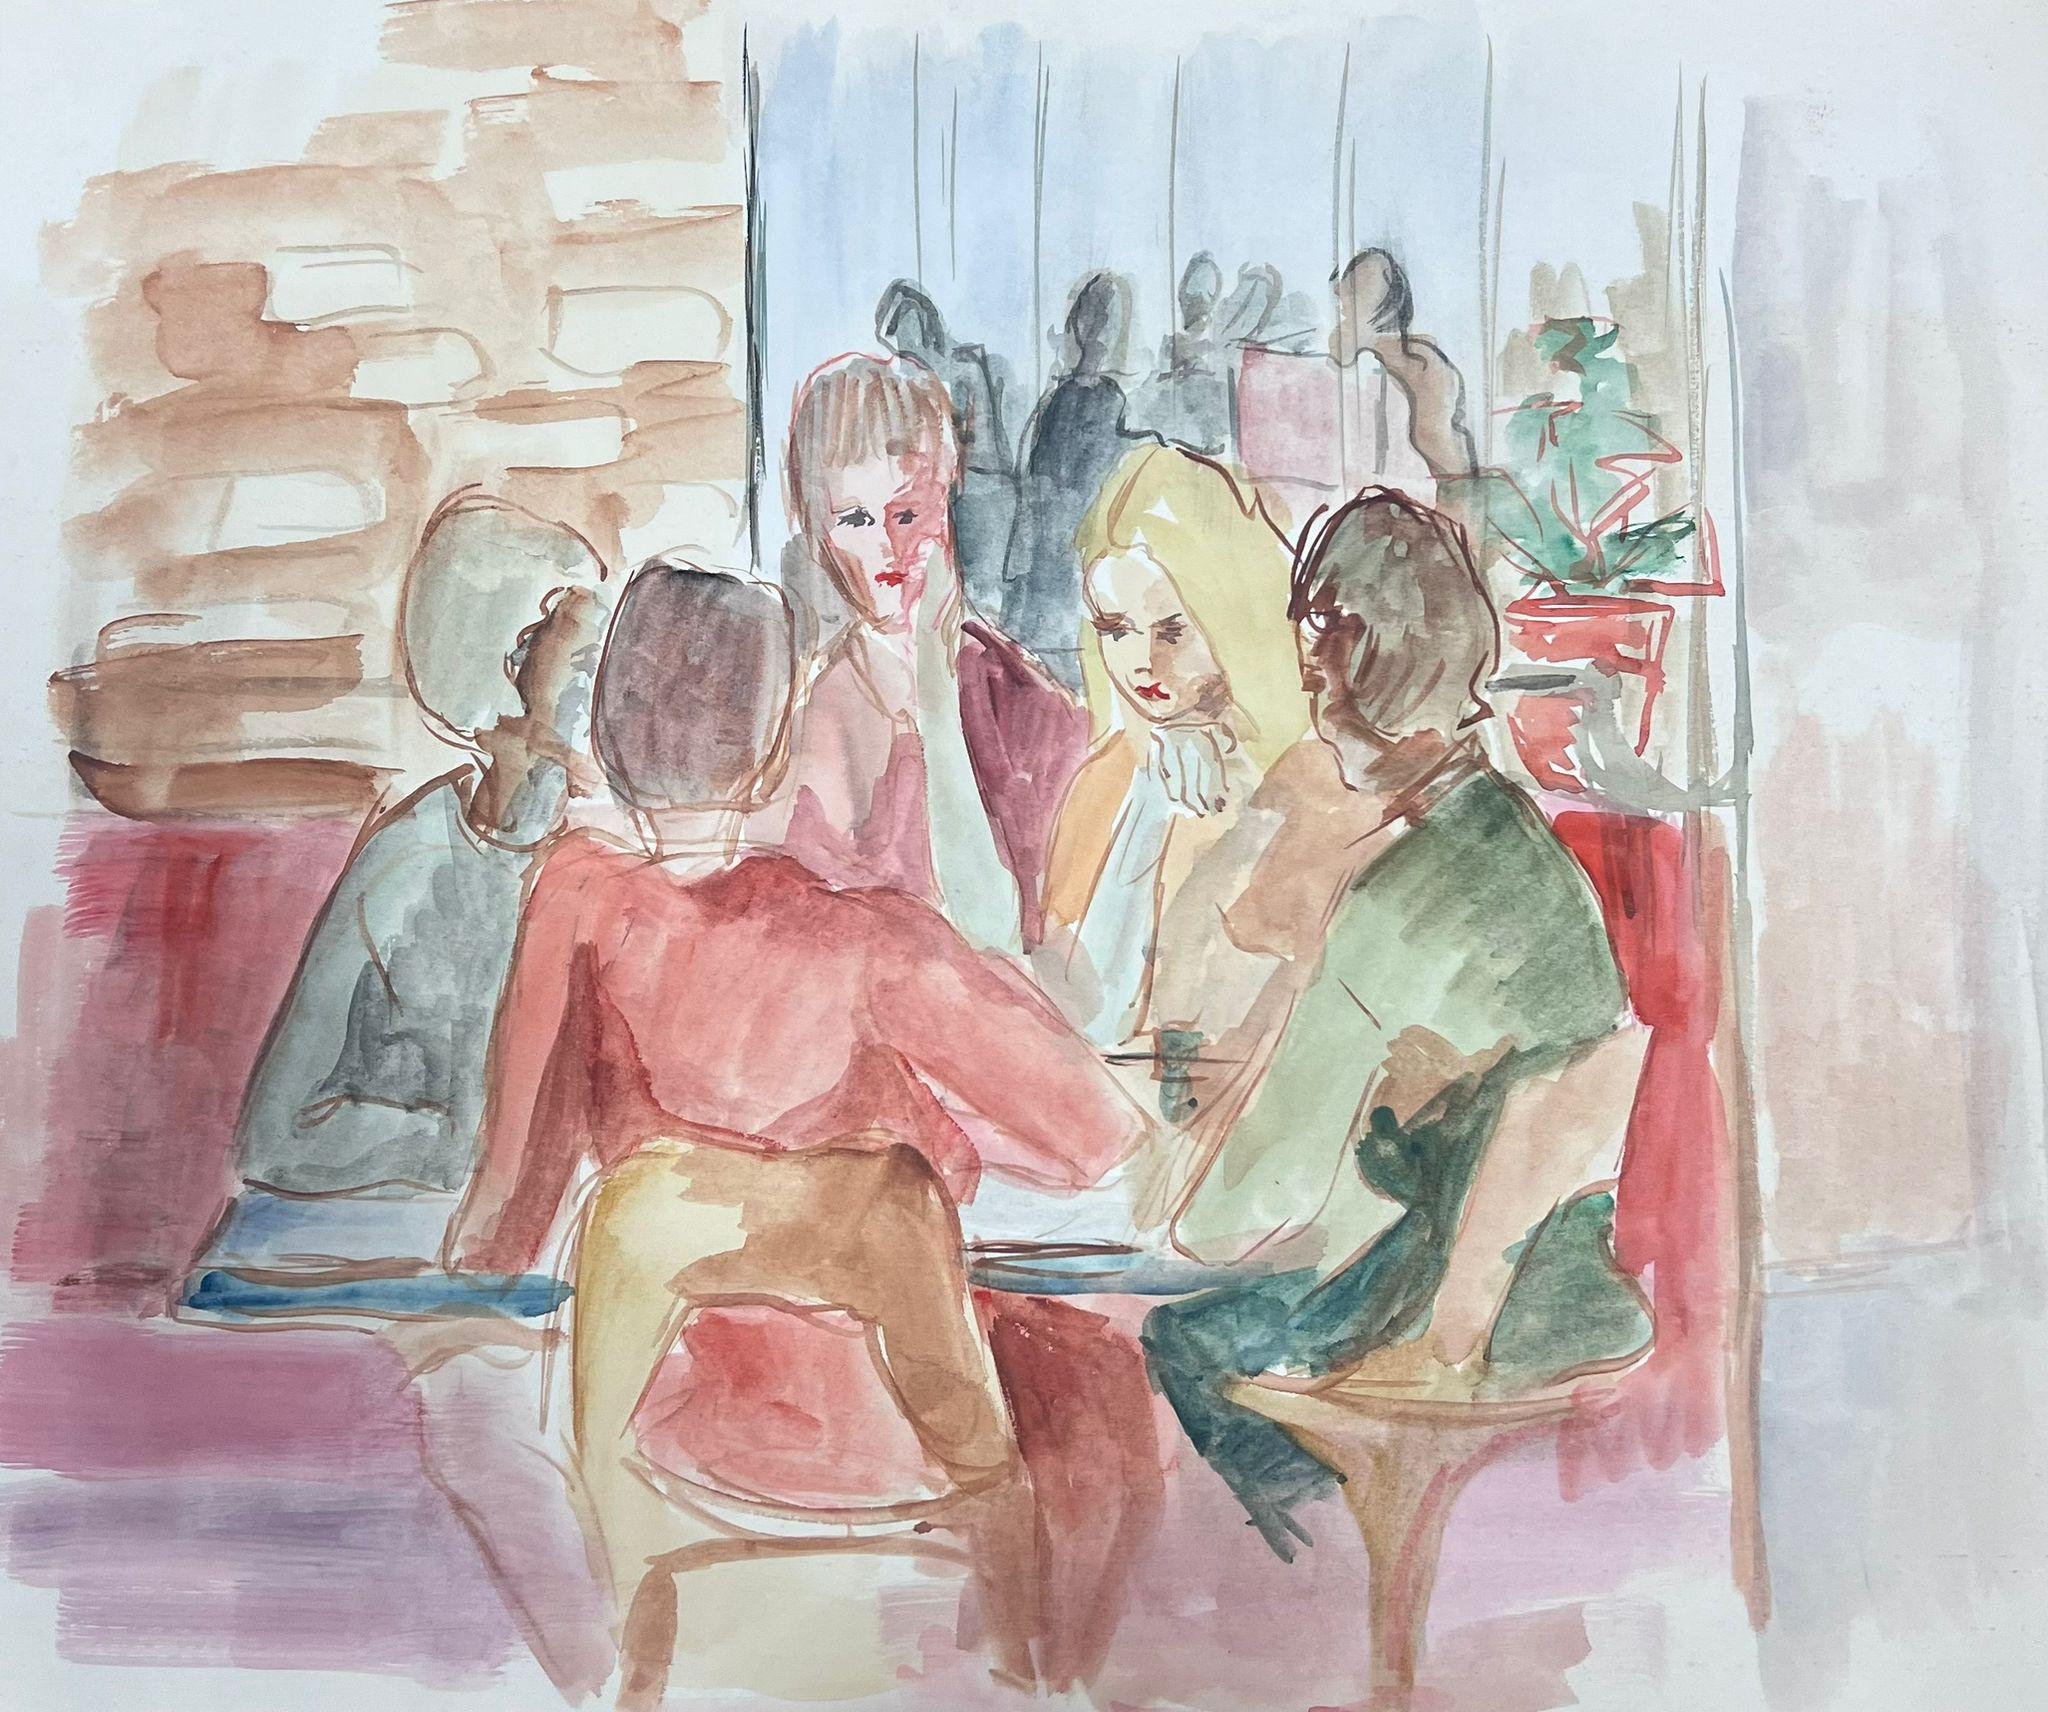 French Expressionist
by Guy Nicod
(French 1923 - 2021)
watercolour on artist paper, unframed
painting : 15 x 19.5 inches
provenance: artists estate, France
condition: very good and sound condition